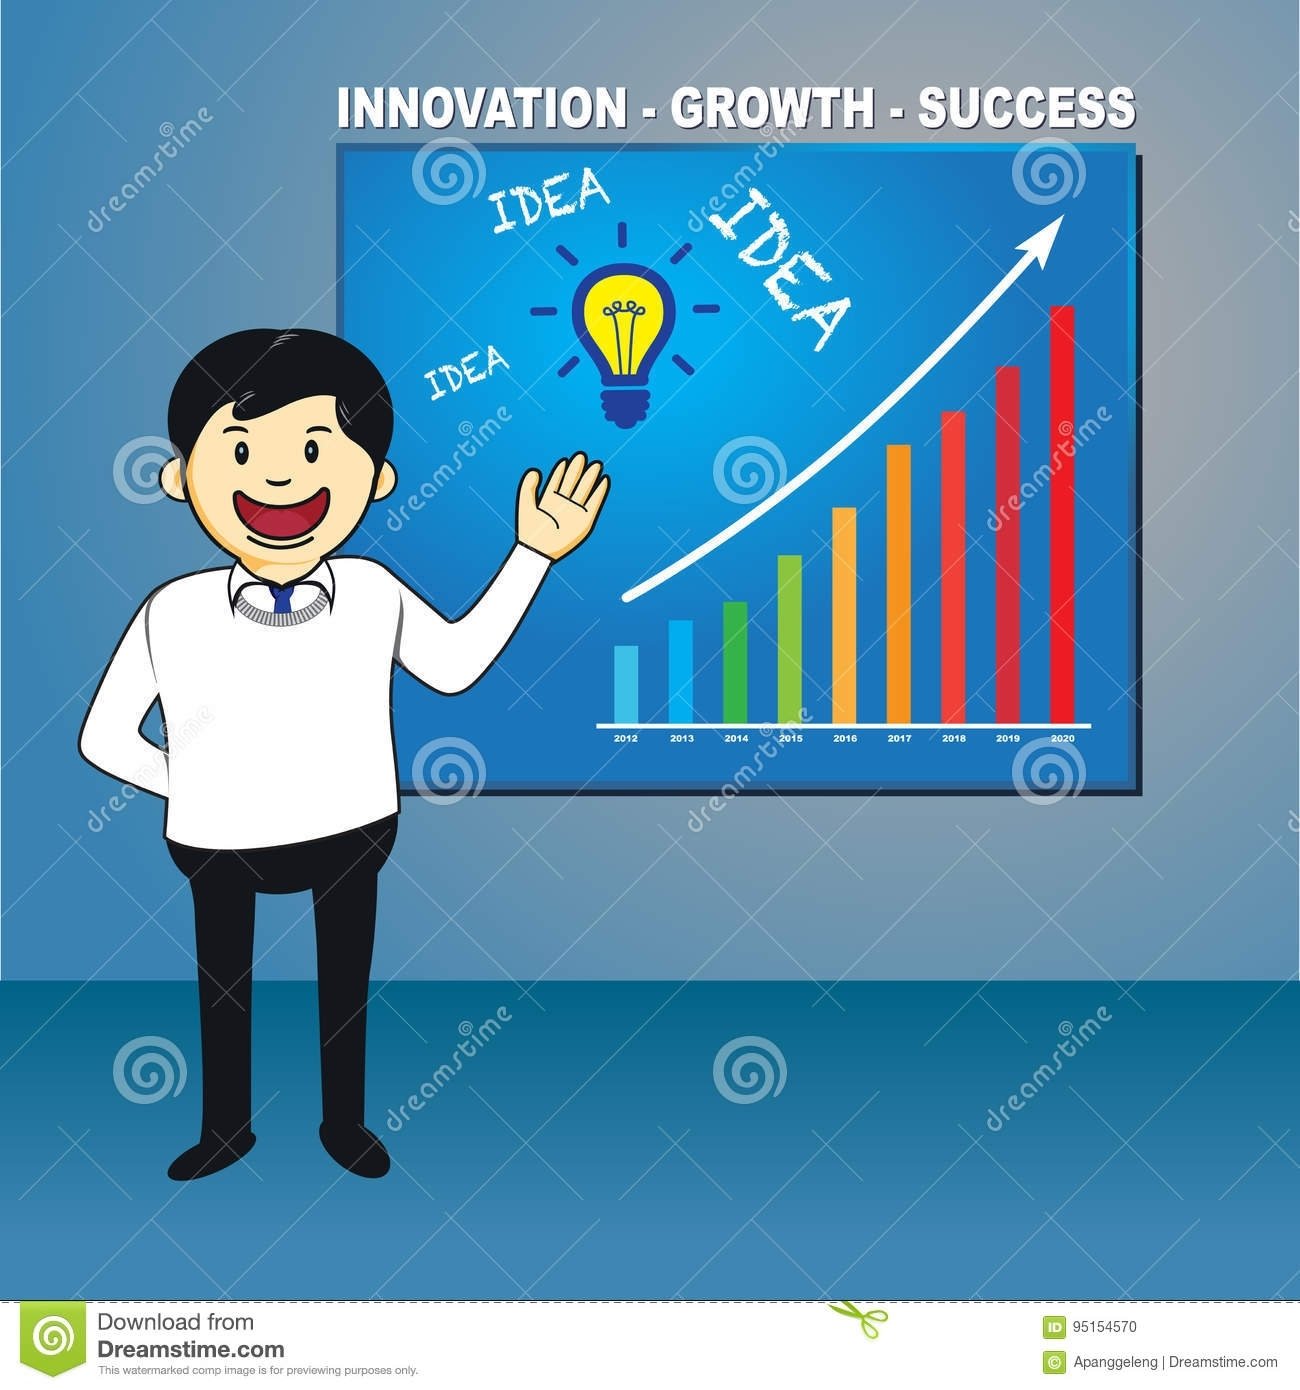 10 Spectacular Do You Have Any Idea do you have any idea for business growth stock vector 2022